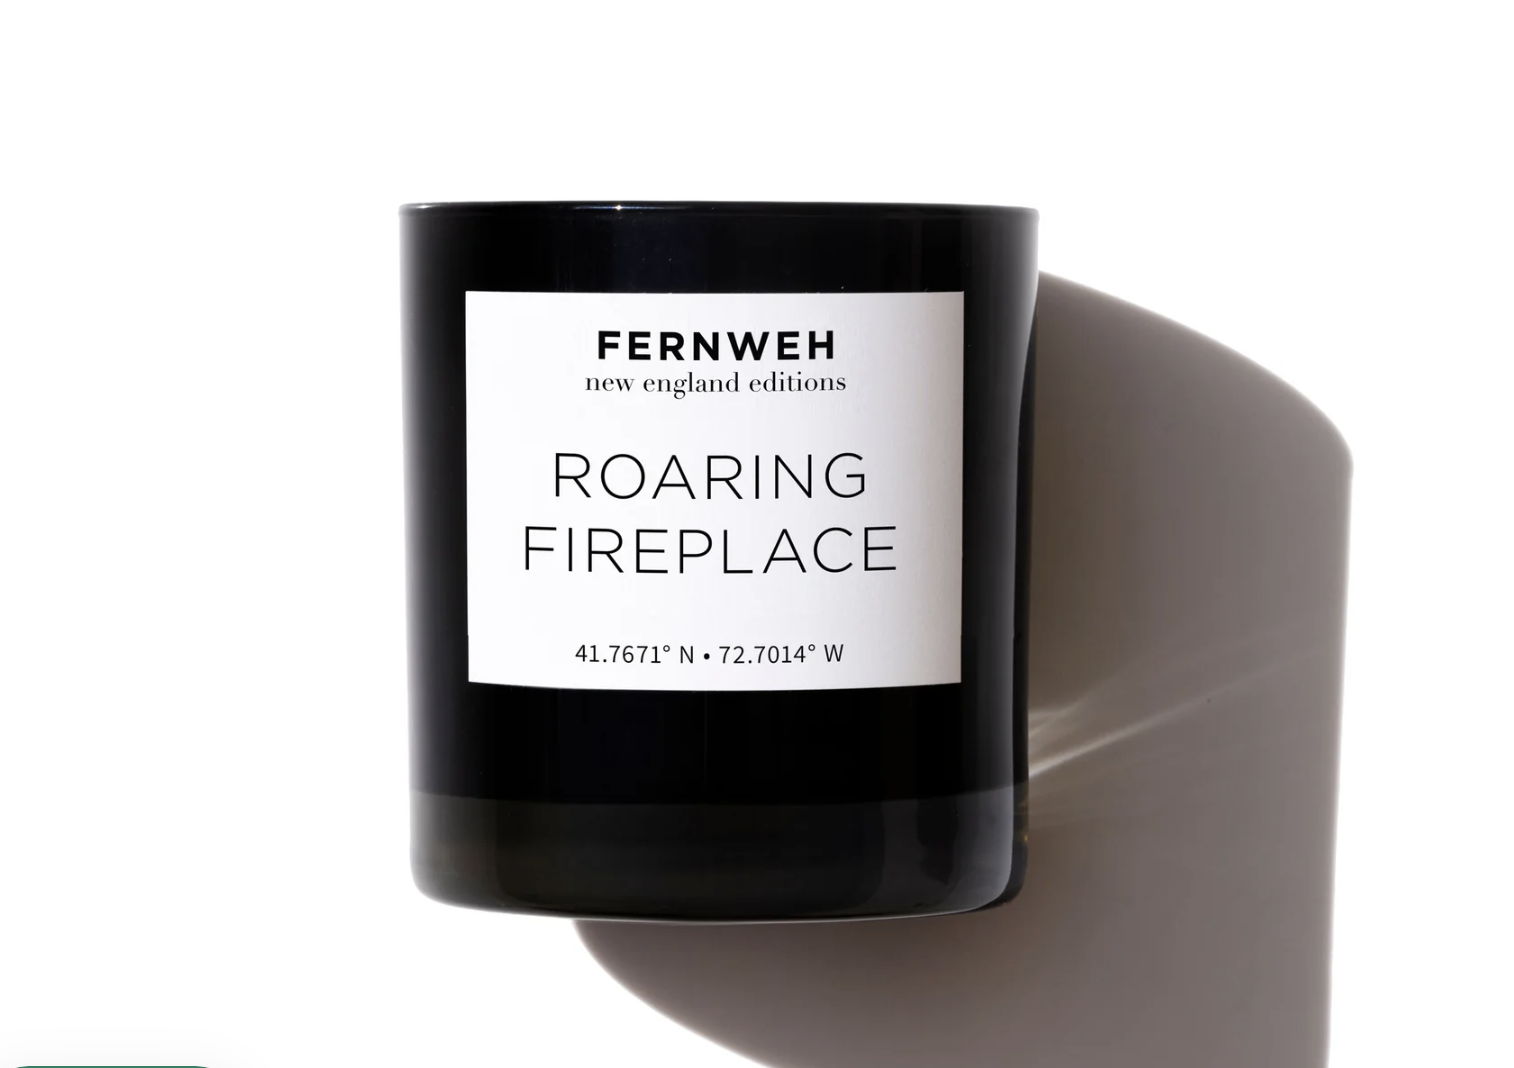 Fernweh editions candle